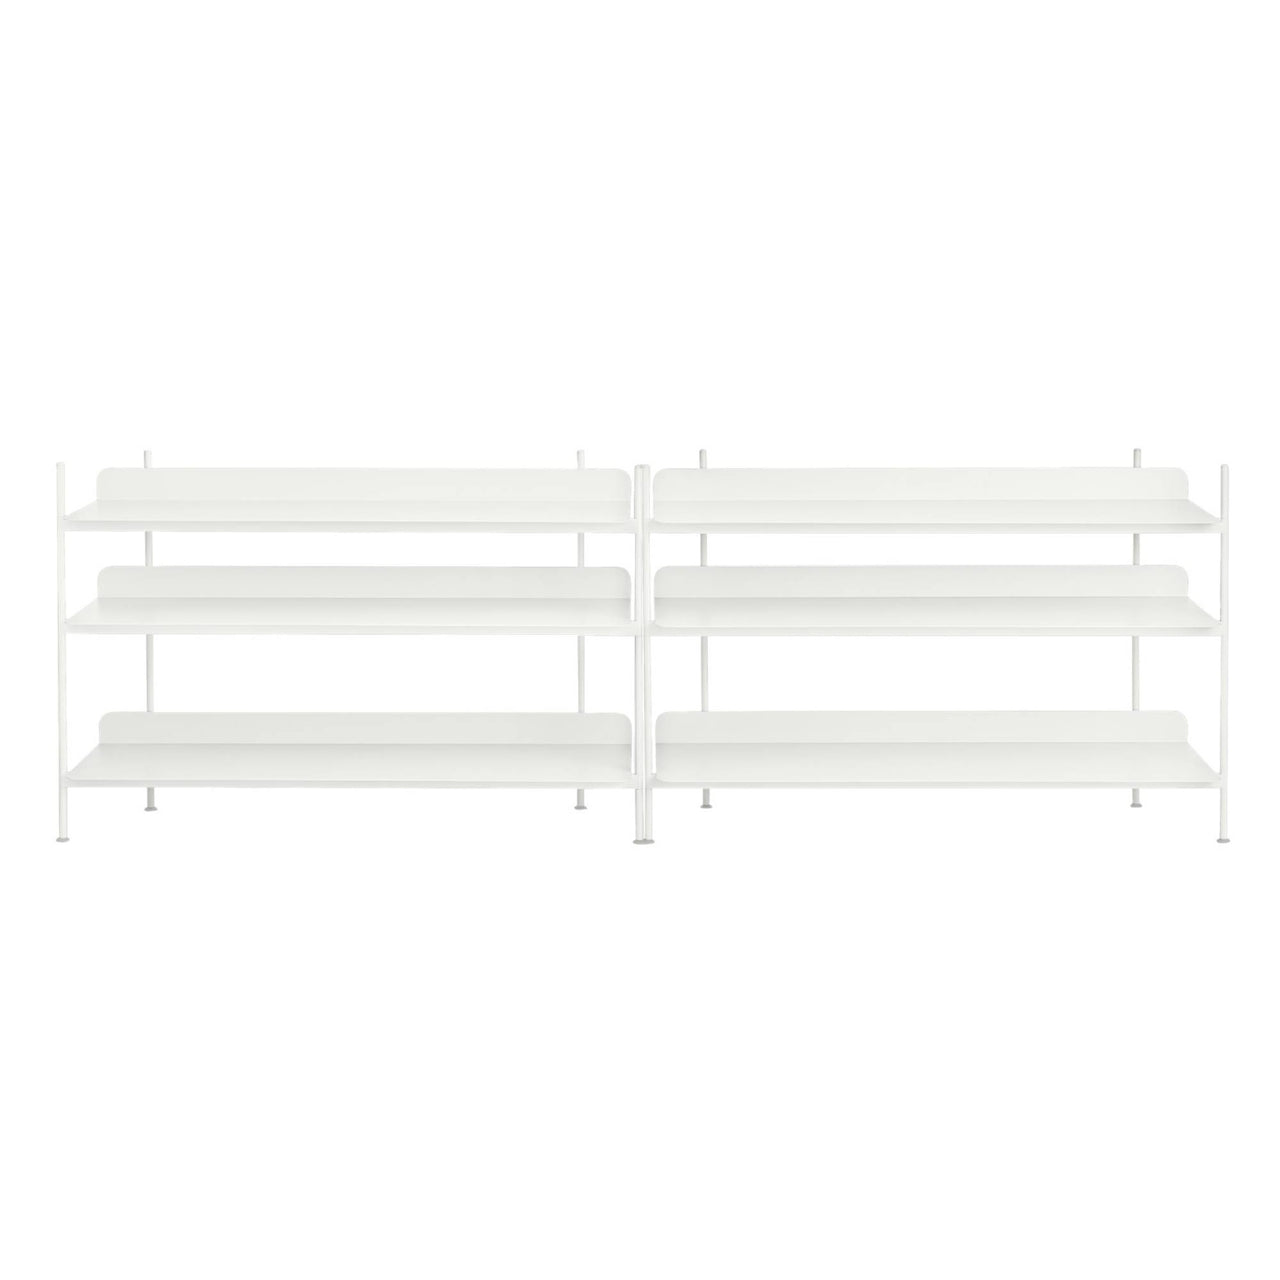 Compile Shelving System: Configuration 6 + White